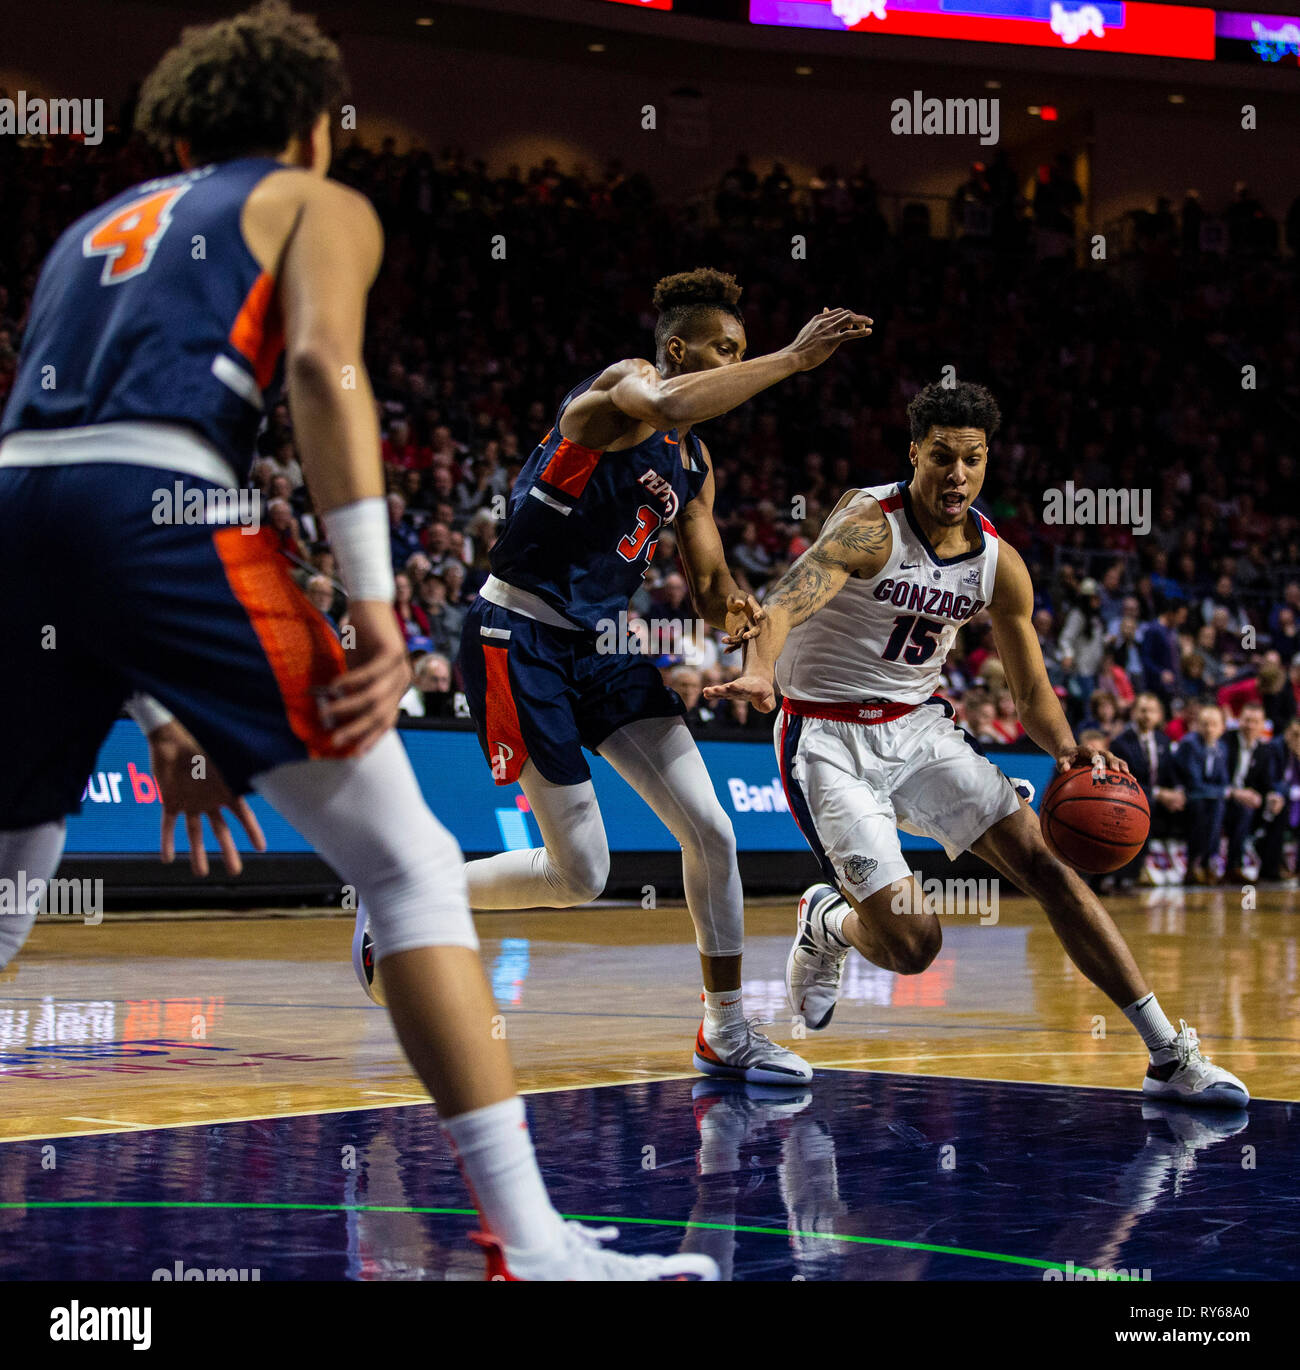 Mar 11 2019 Las Vegas, NV, U.S.A. Gonzaga forward Brandon Clarke (15) drives to the basket during the NCAA West Coast Conference Men's Basketball Tournament semi -final between the Pepperdine Wave and the Gonzaga Bulldogs 100-74 win at Orleans Arena Las Vegas, NV. Thurman James/CSM Stock Photo